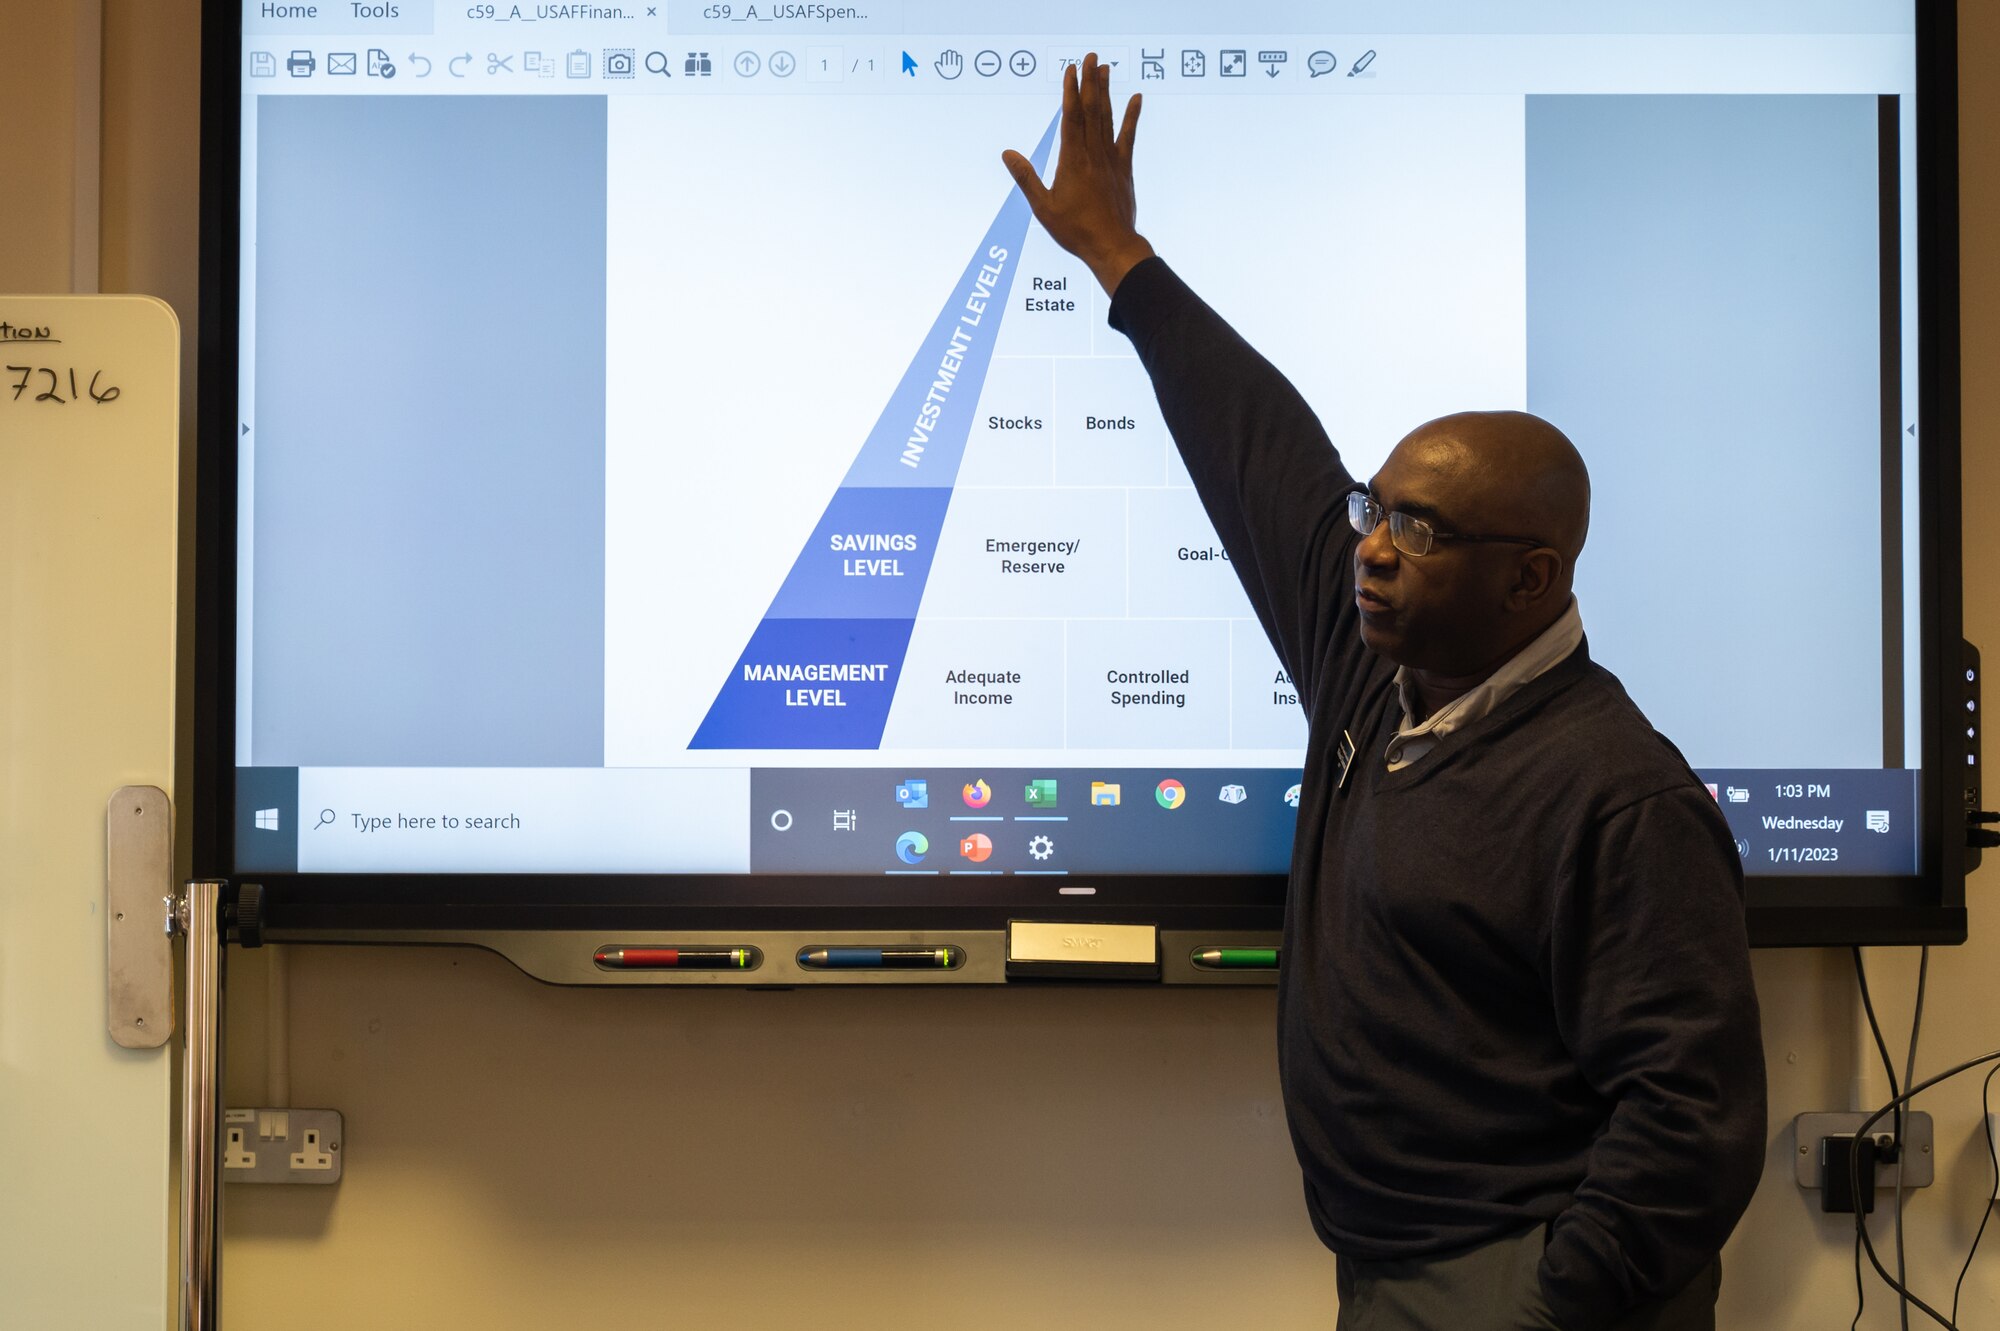 Michael Chatman, Military and Family Readiness Center personal financial counselor, instructs Team Mildenhall Airmen about financial responsibility and money management, Jan. 11, 2023, at Royal Air Force Mildenhall, England.